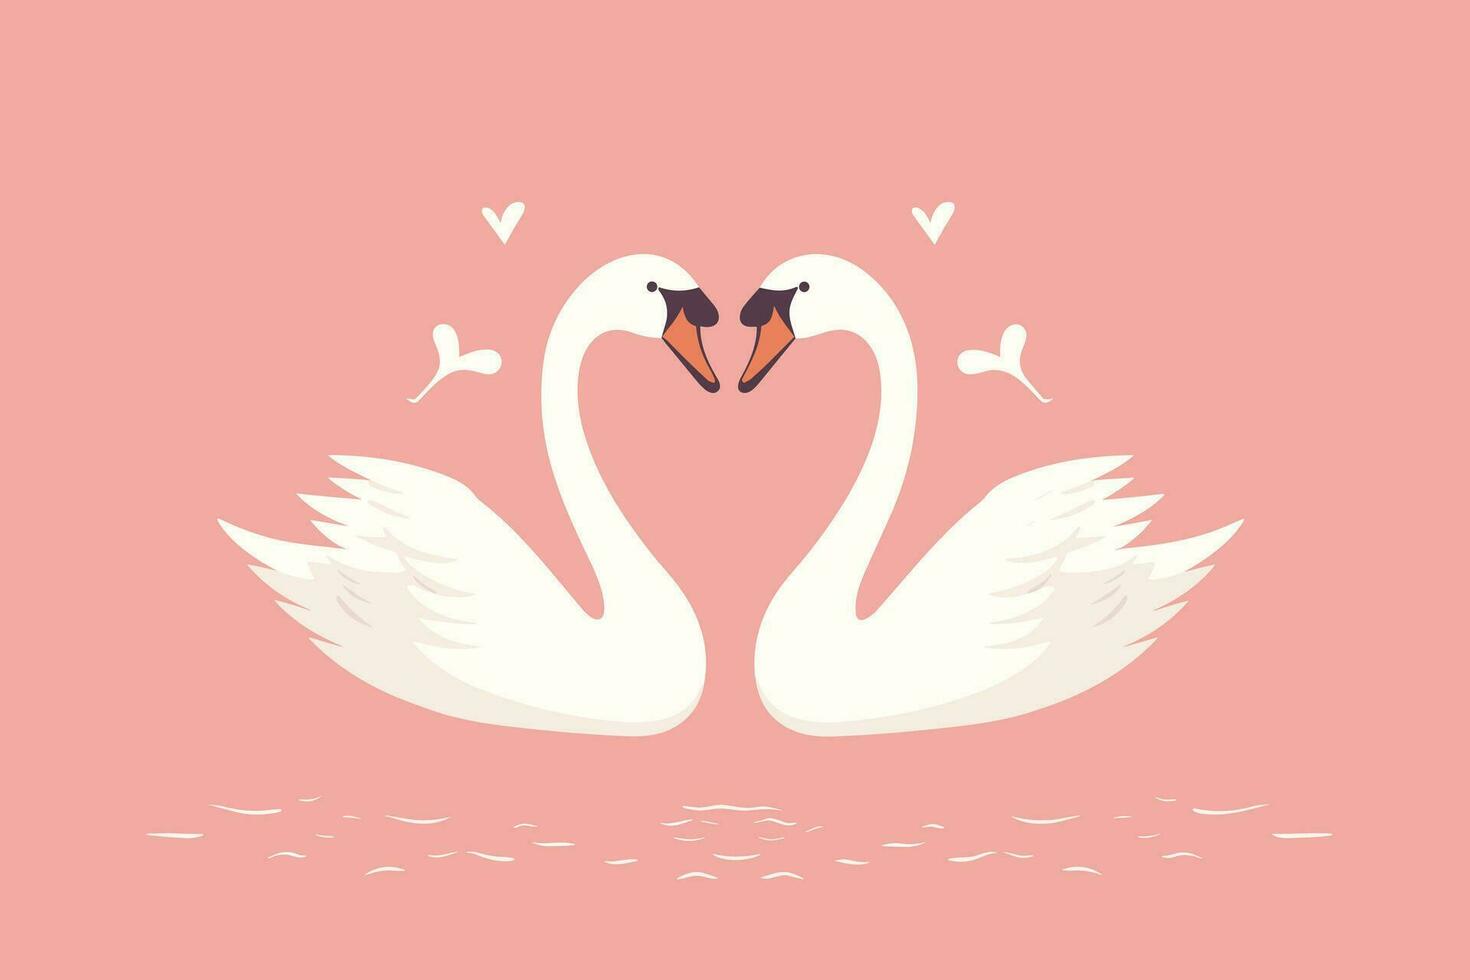 Two swans formed love shape illustration, two swans formed love shape, swans meant for love, lover's day background, valentines day background vector